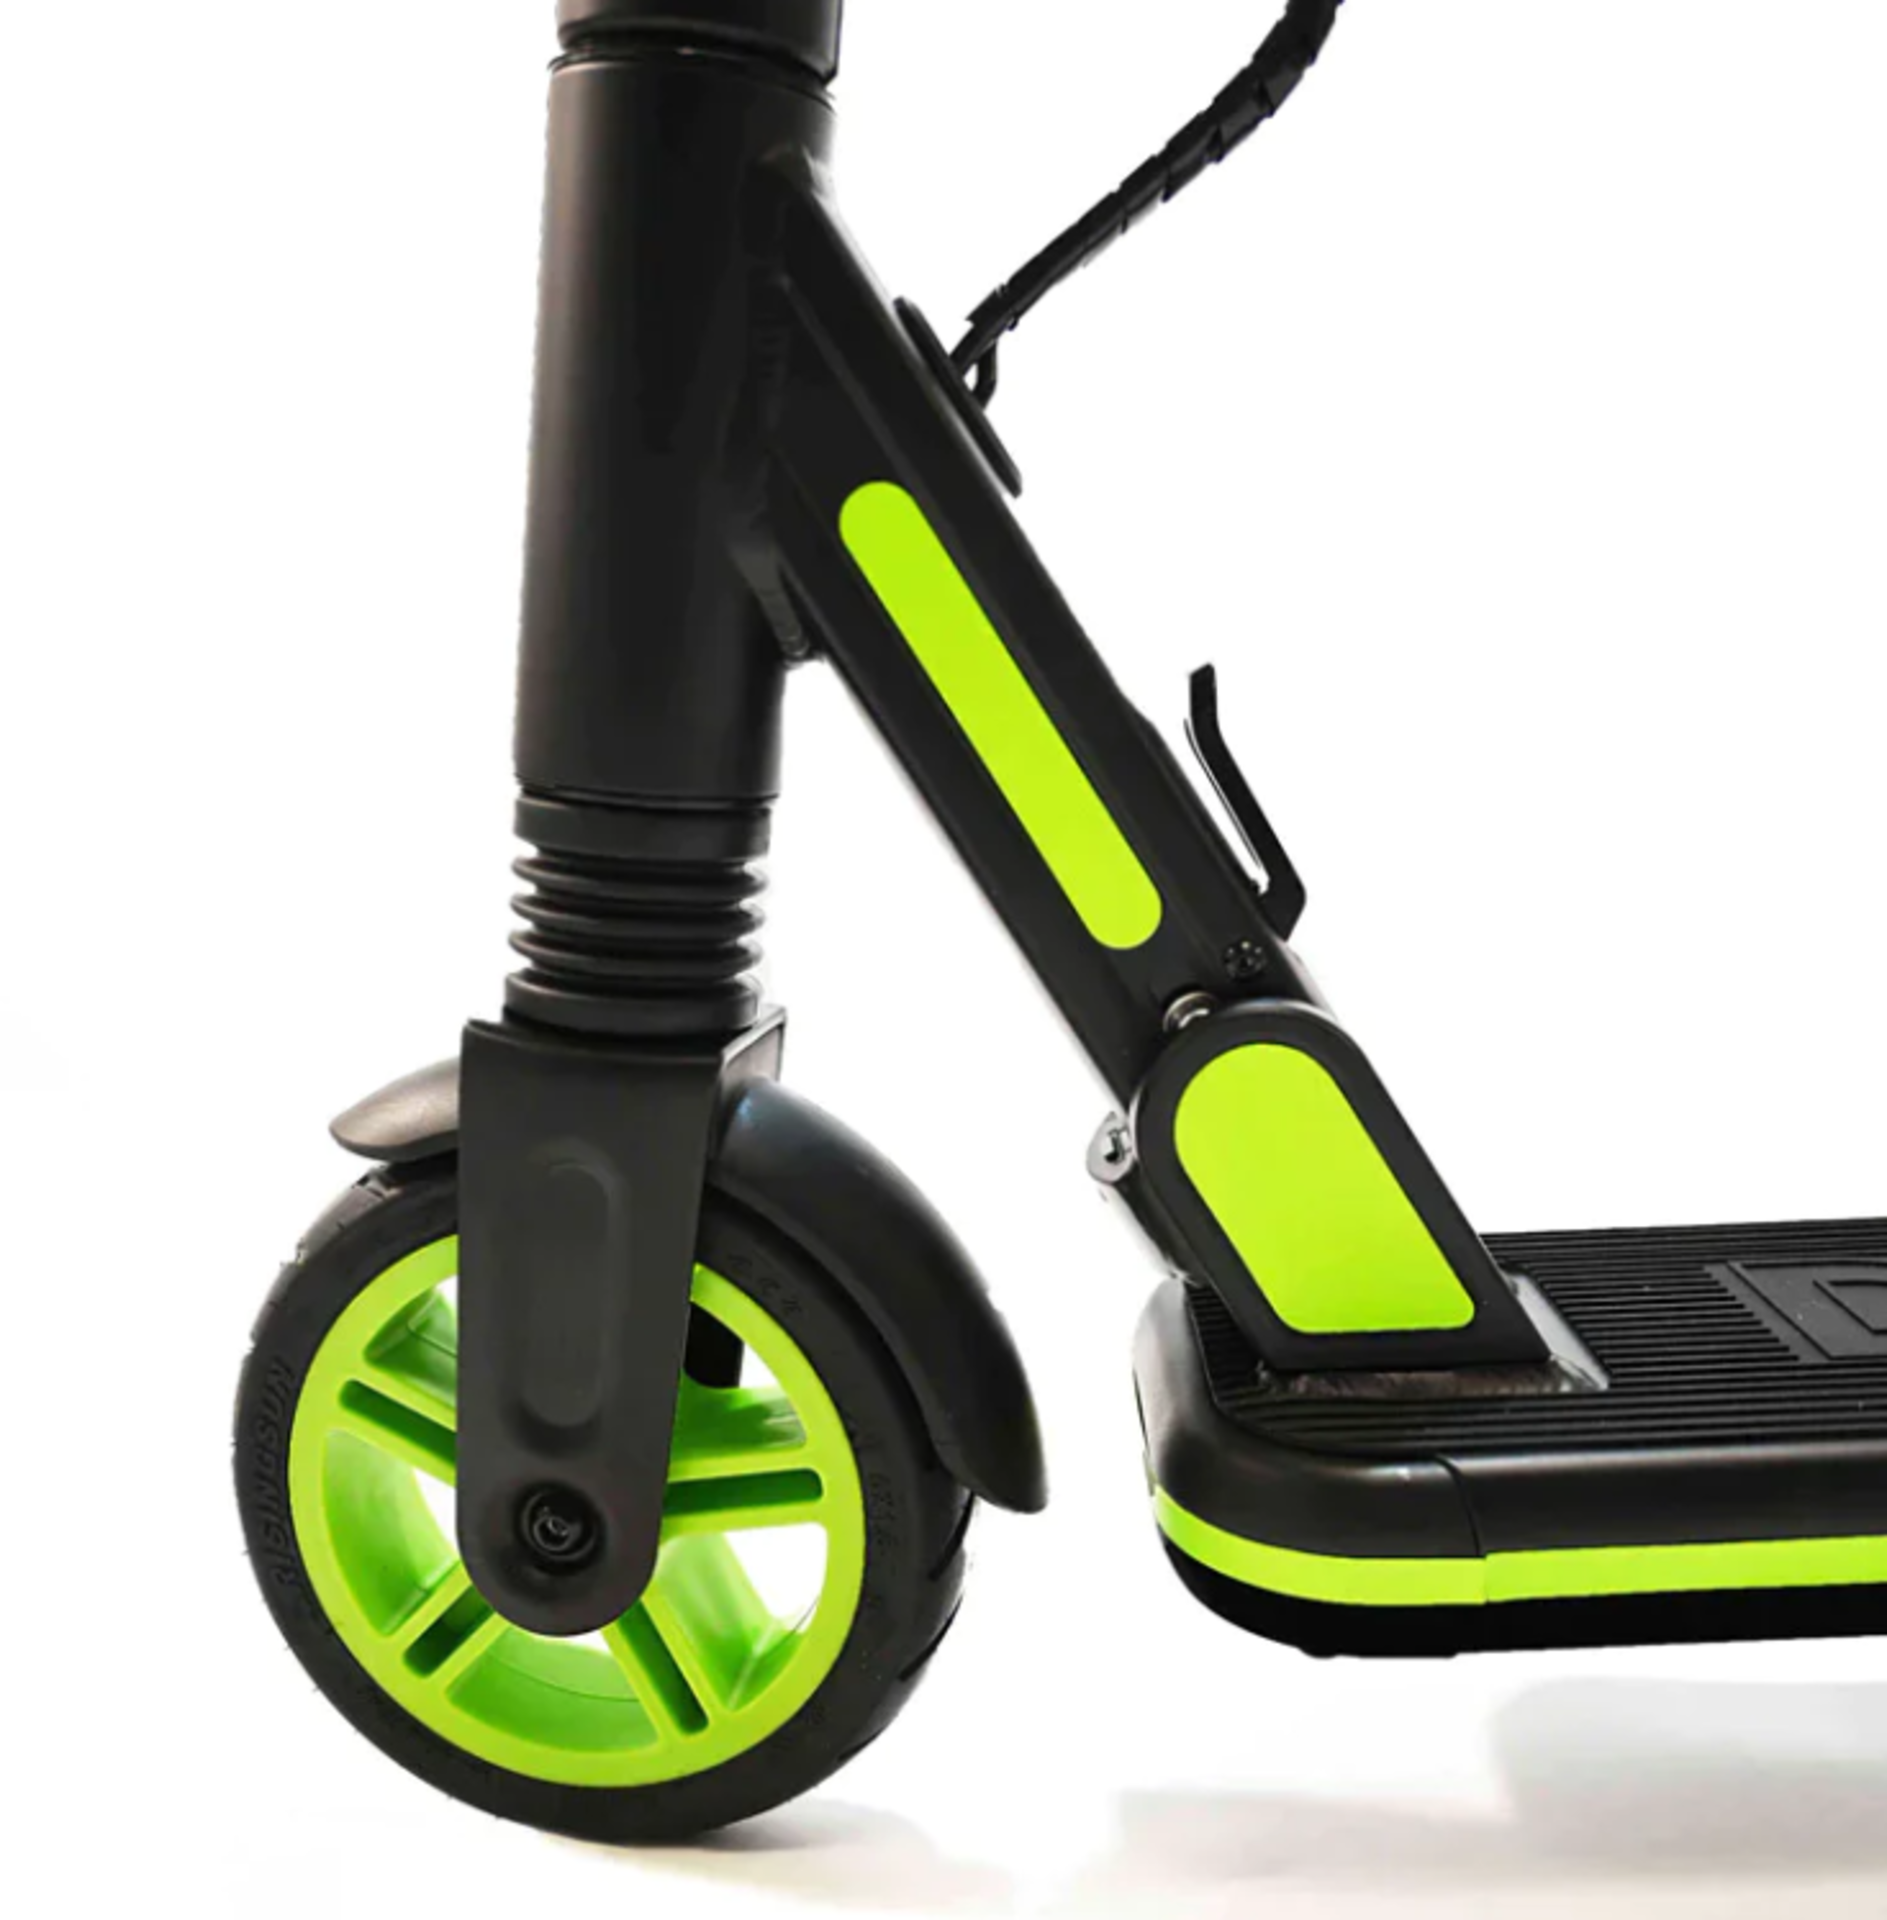 New & Boxed DECENT Kids Electric Scooter - Blue/Green. Let your kids zip around in style. With - Image 3 of 3